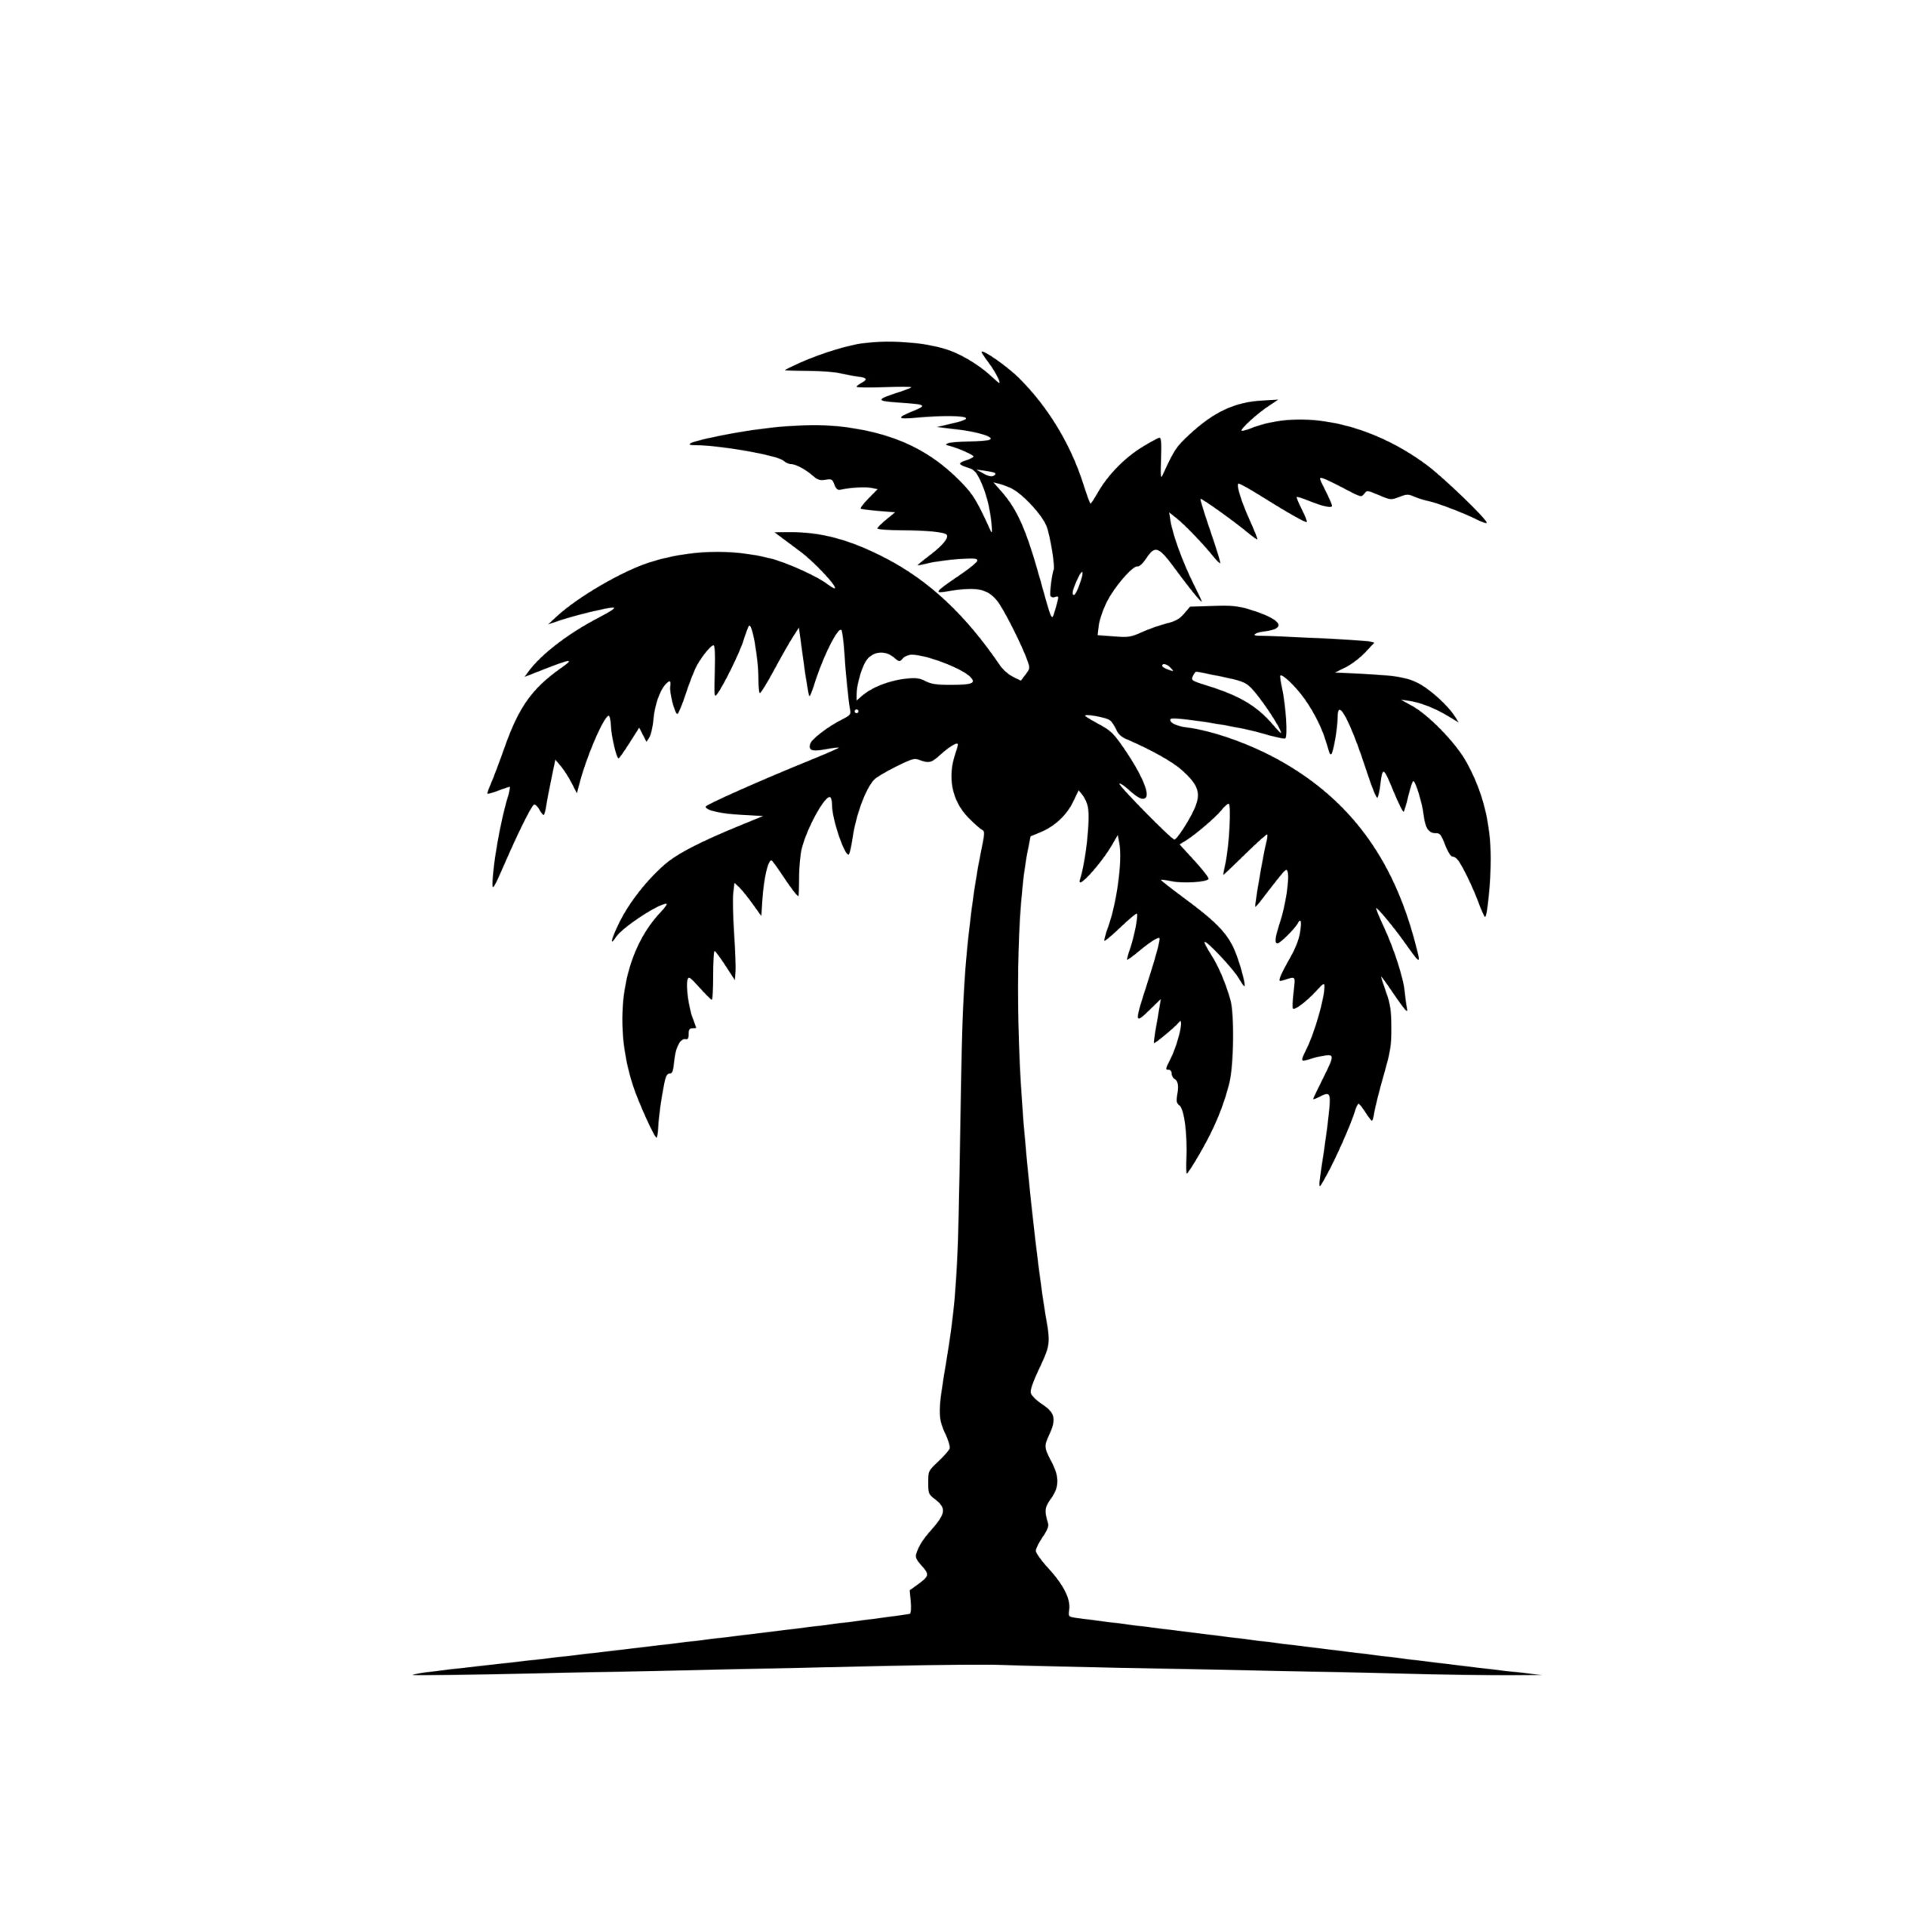 Palm Tree SVG File: Instant Download for Cricut, Silhouette, Laser Machines